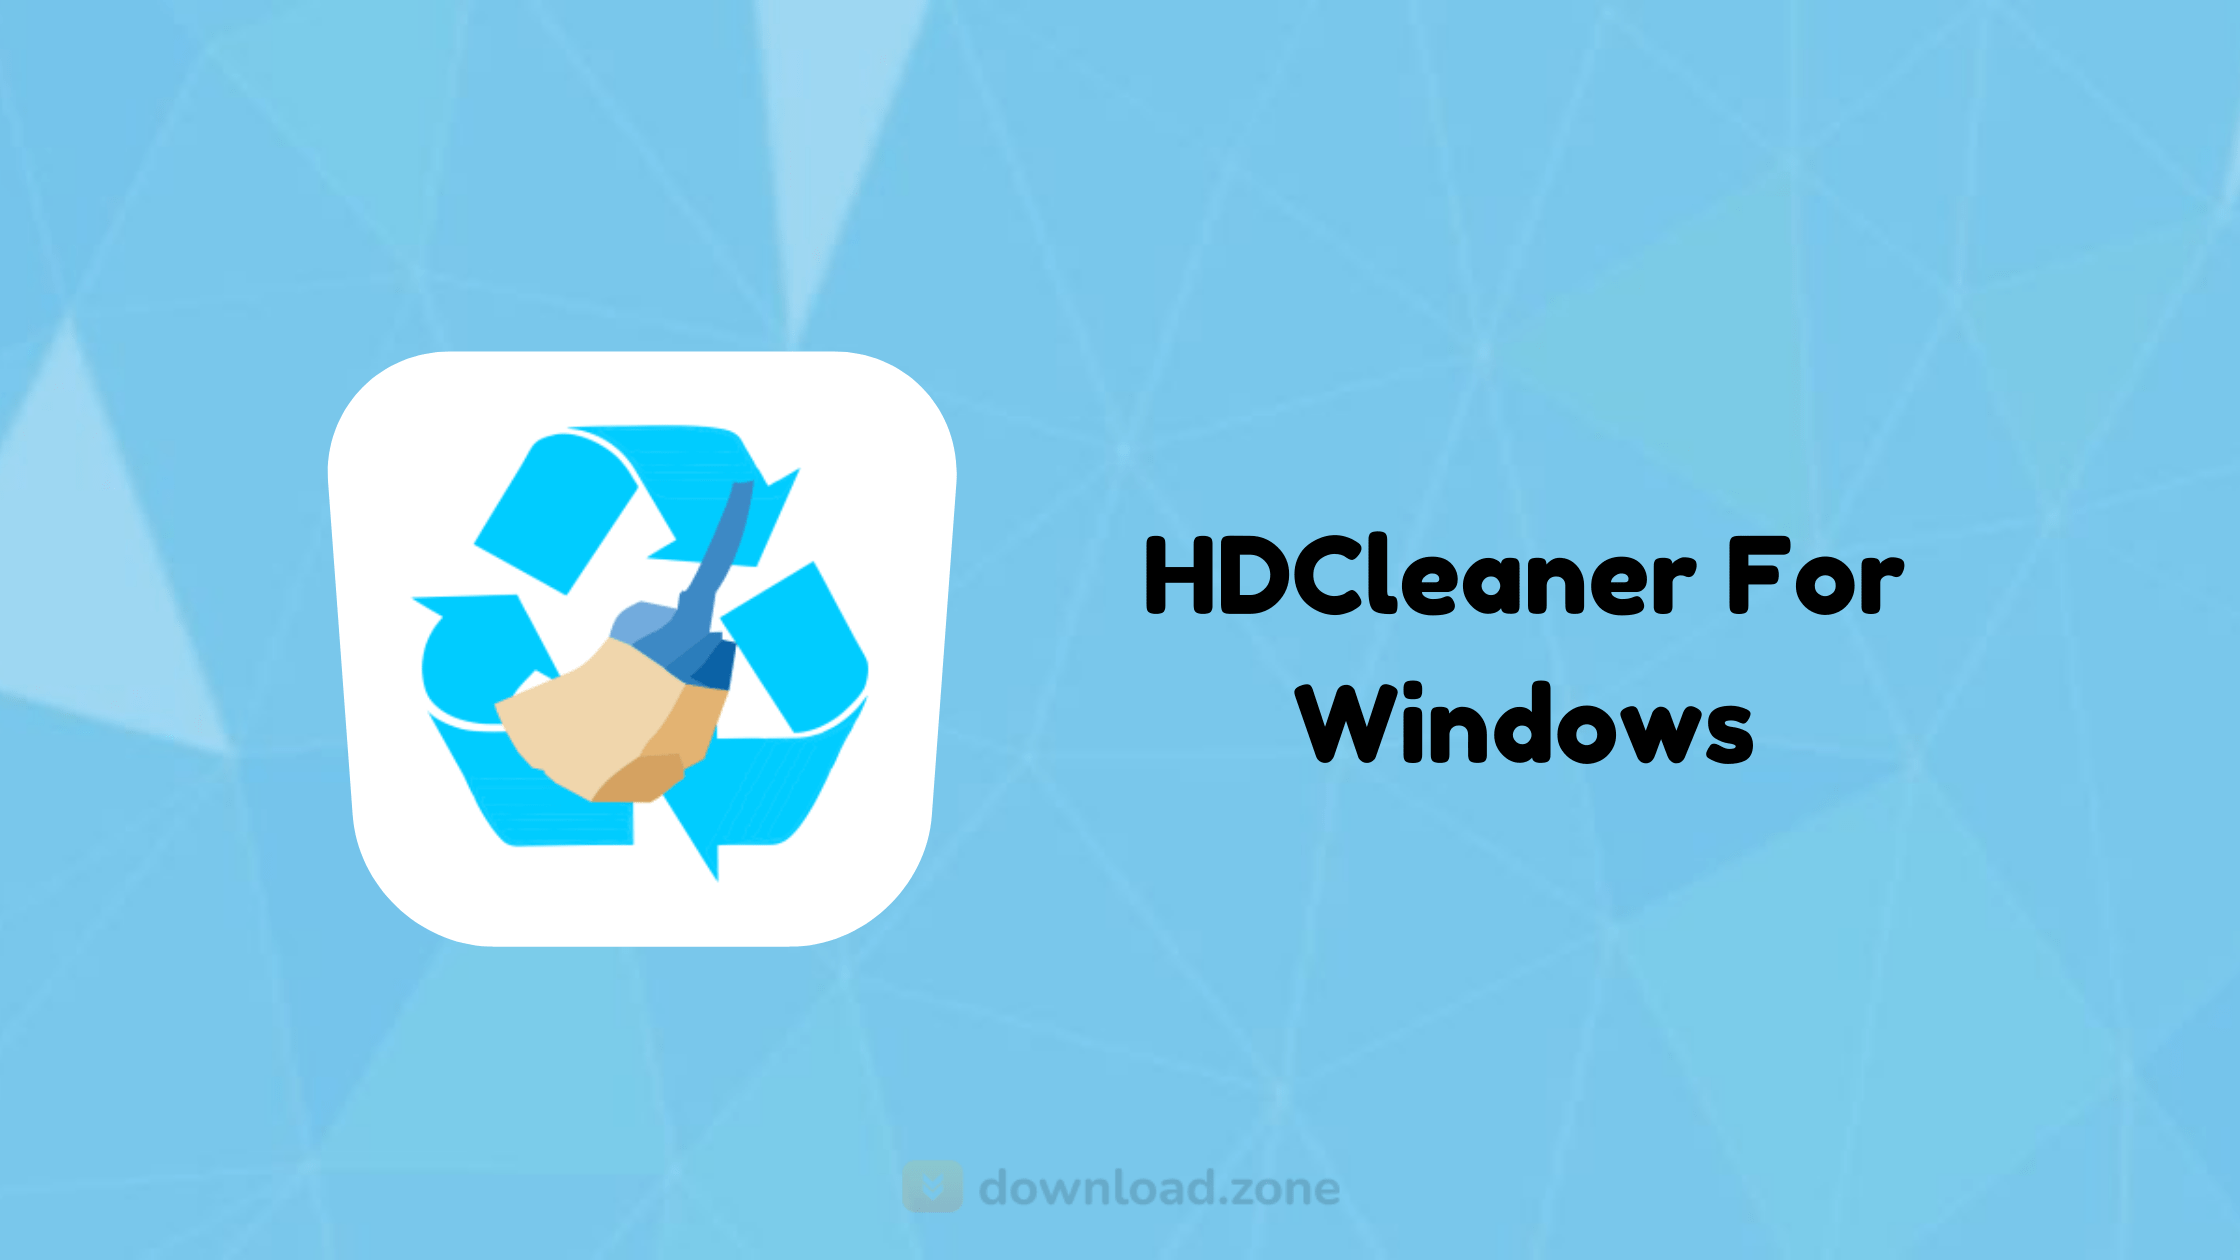 download the new HDCleaner 2.057